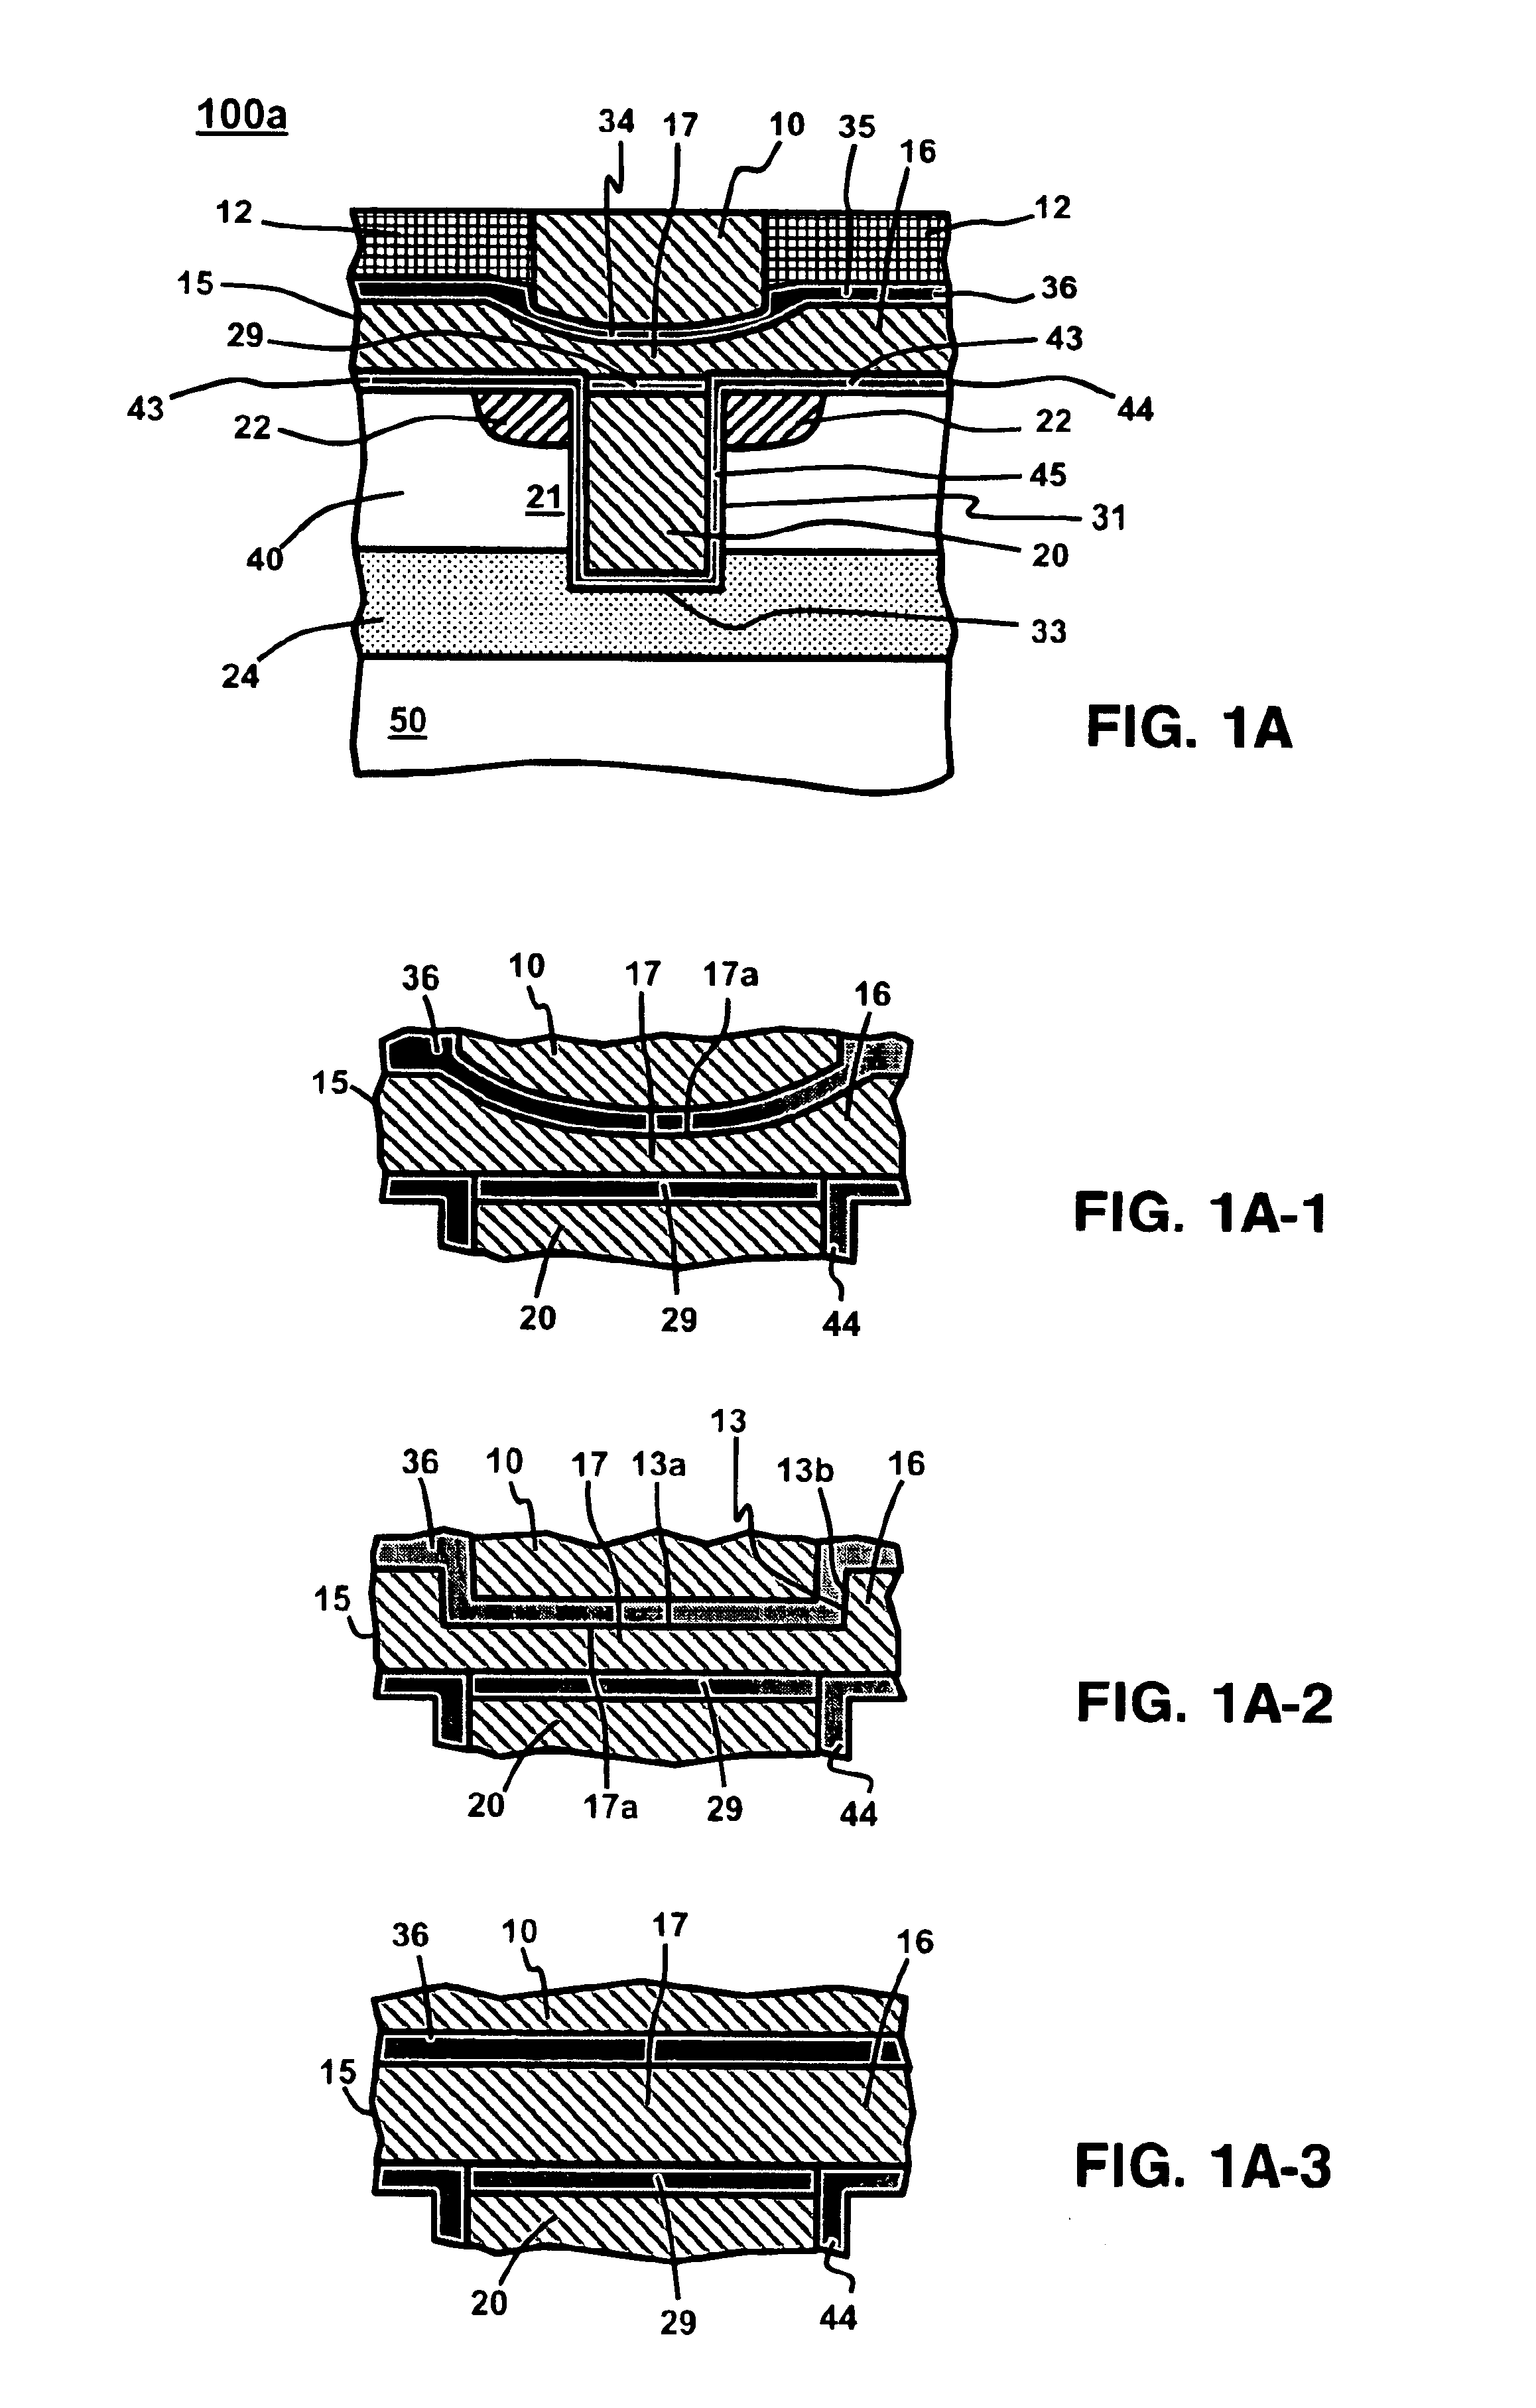 Floating-gate memory cell having trench structure with ballistic-charge injector, and the array of memory cells